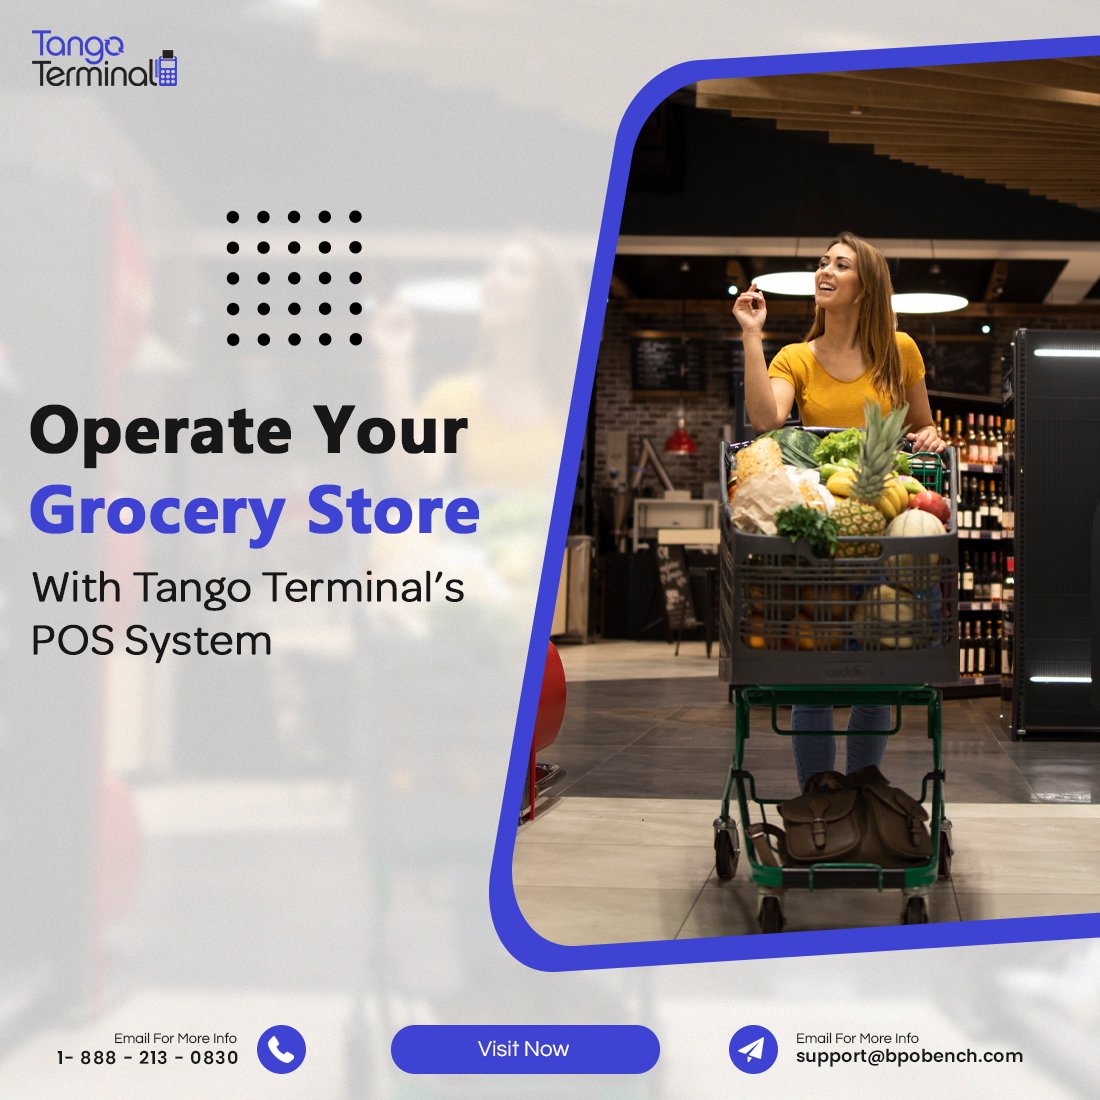 Manage your inventory, sales, and customer interactions with Tango Terminal's POS solution for grocery stores.

#tangoterminal #customerexperience #pos #retailbusiness #automatingtasks #marketingsolution #ecommerce